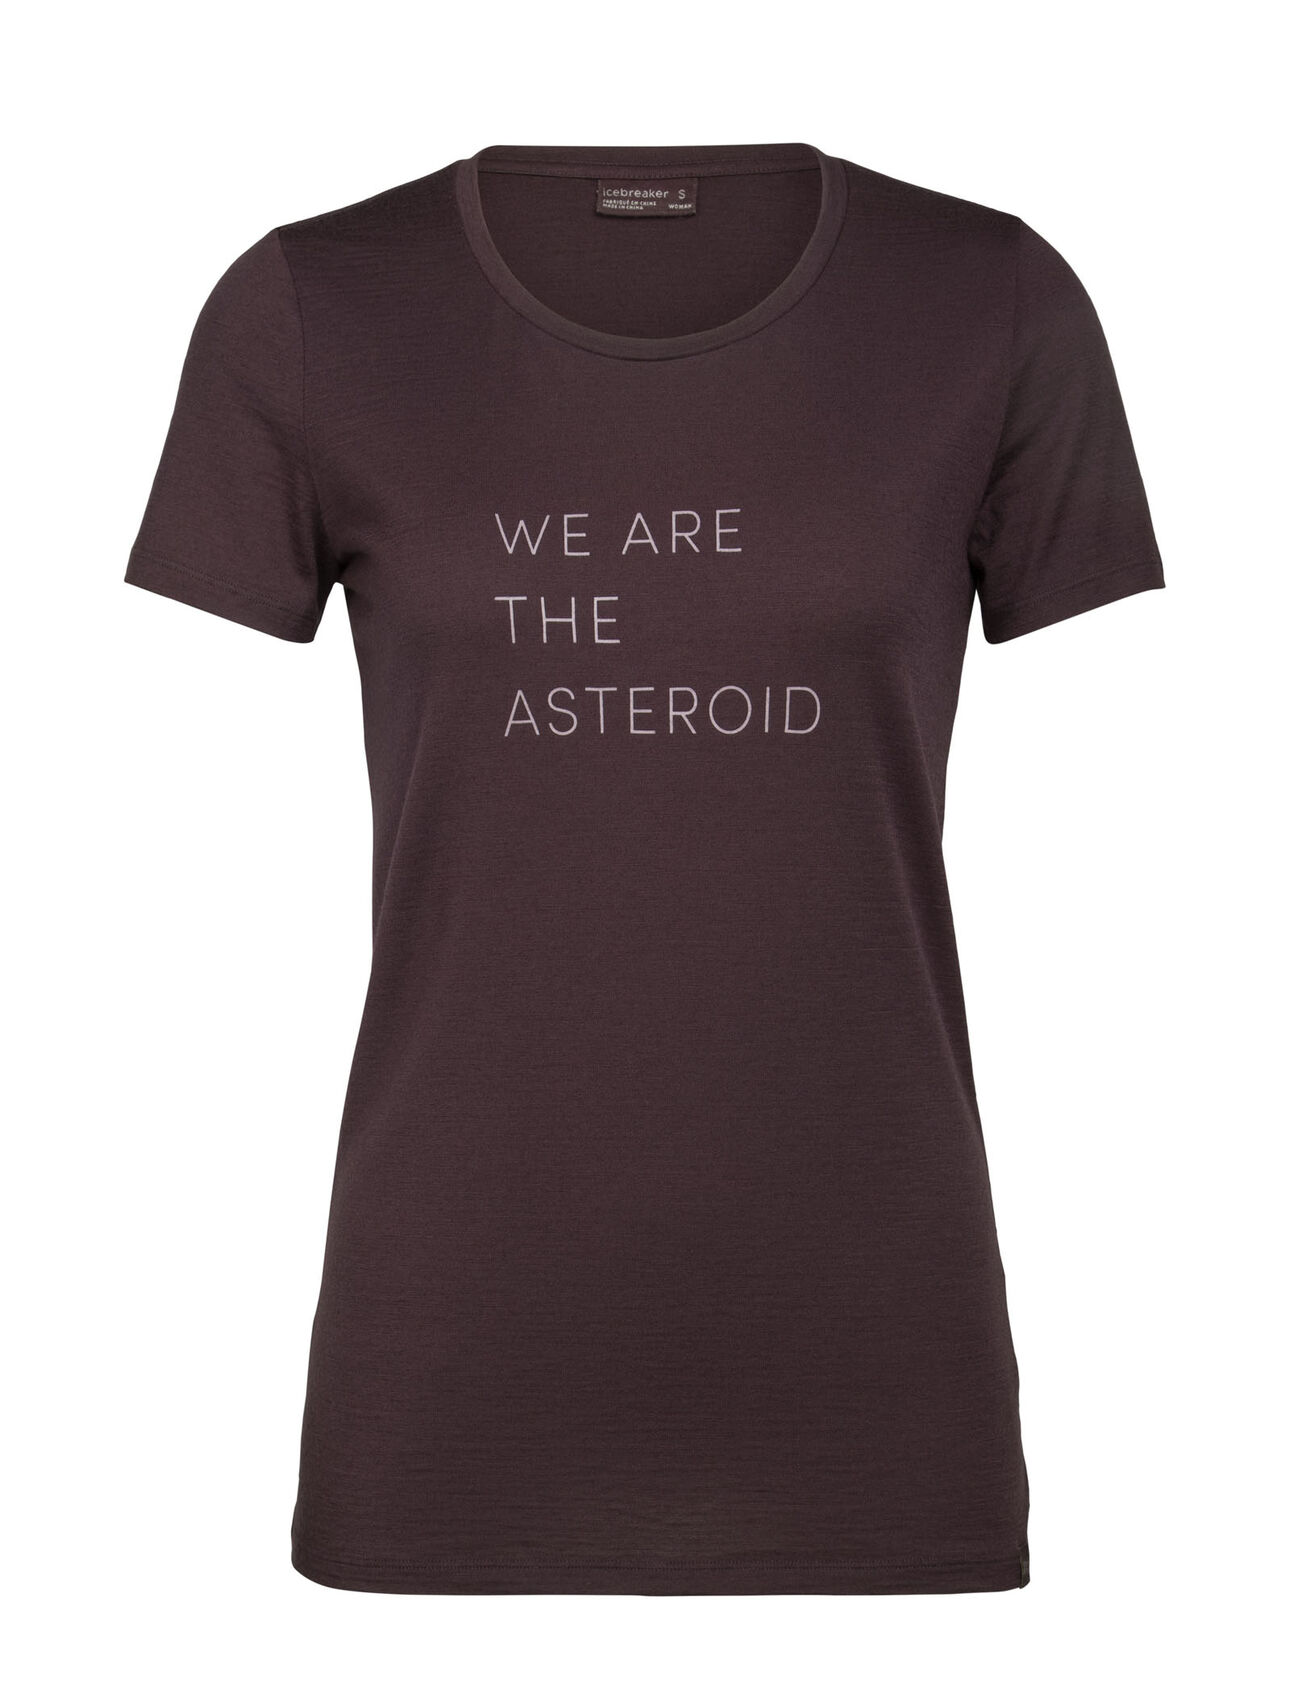 Womens Nature Dye Merino 200 Short Sleeve Crewe T-Shirt Asteroid English Justin Brice Guariglia, a New York City based artist and photographer whose work addresses climate change, has partnered with icebreaker.The WE ARE THE ASTEROID Nature Dye 200 Short Sleeve Crewe, reflects on how humans have become the greatest geological force on the planet and is created using natural plant pigments and 65% less water than traditional dyeing methods.Inspired by people with purpose, icebreaker provides a platform to raise greater awareness and visibility of the crisis our natural world is facing. Learn more about the collaboration. WE ARE THE ASTEROID text Timothy Morton.